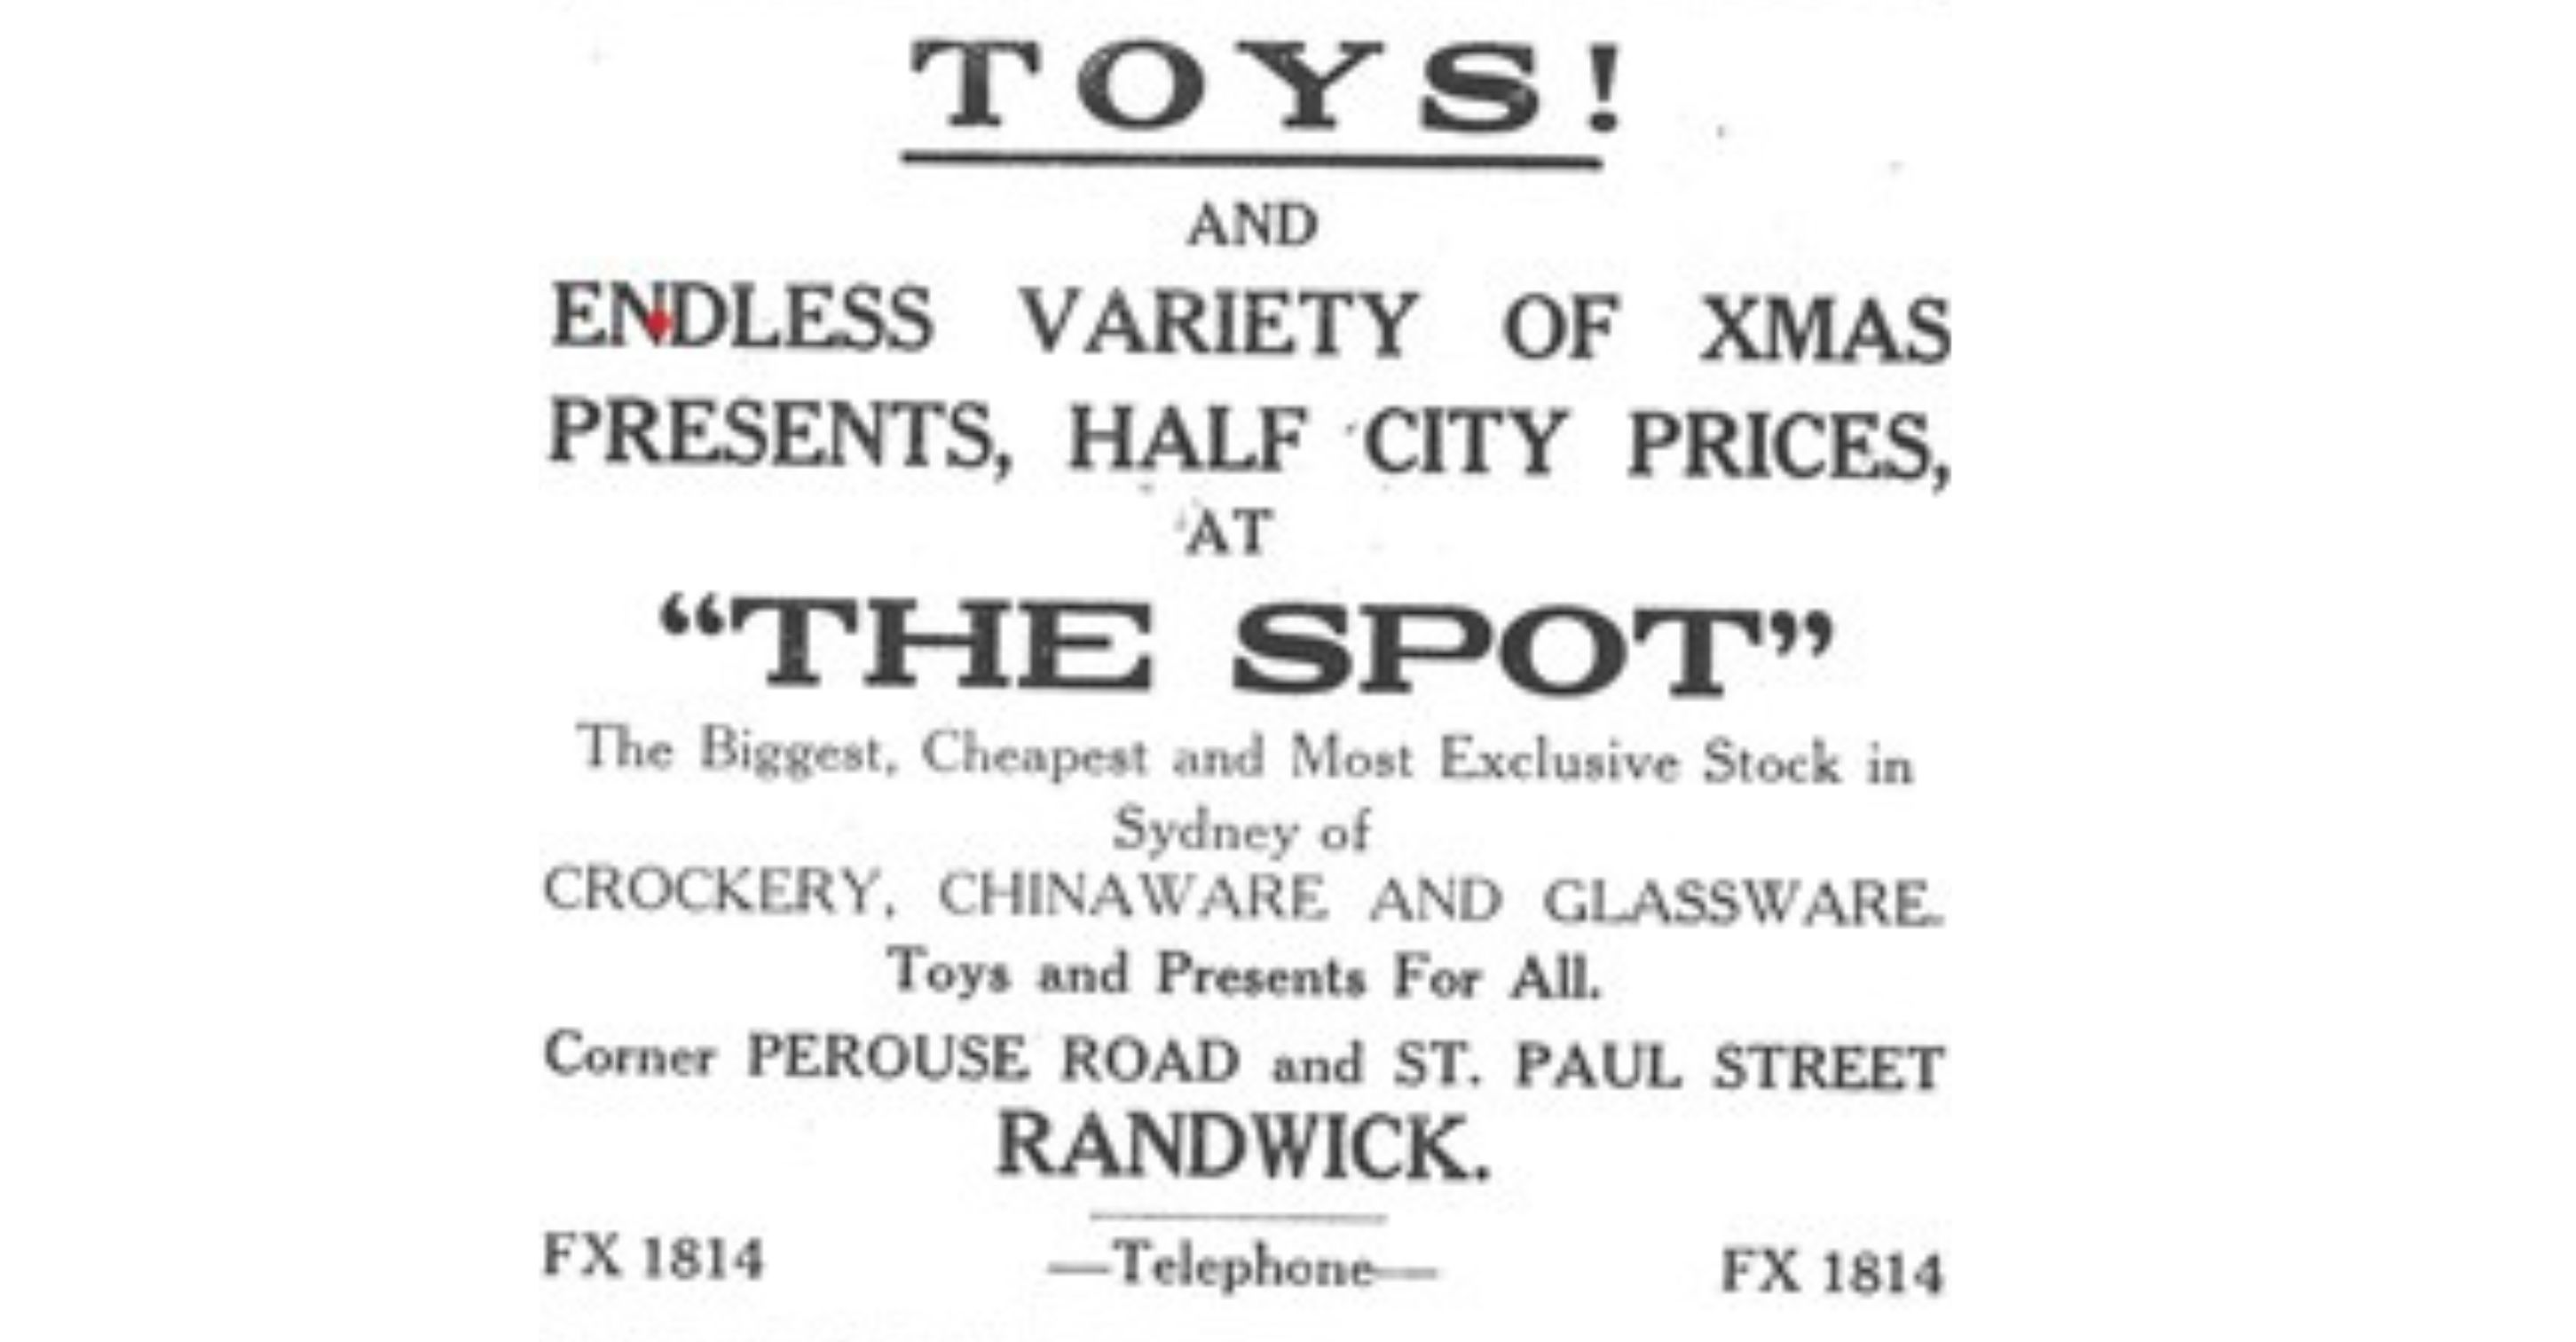 Image depicting advertisement in South Sydney News referring to the local business as 'The Spot'.